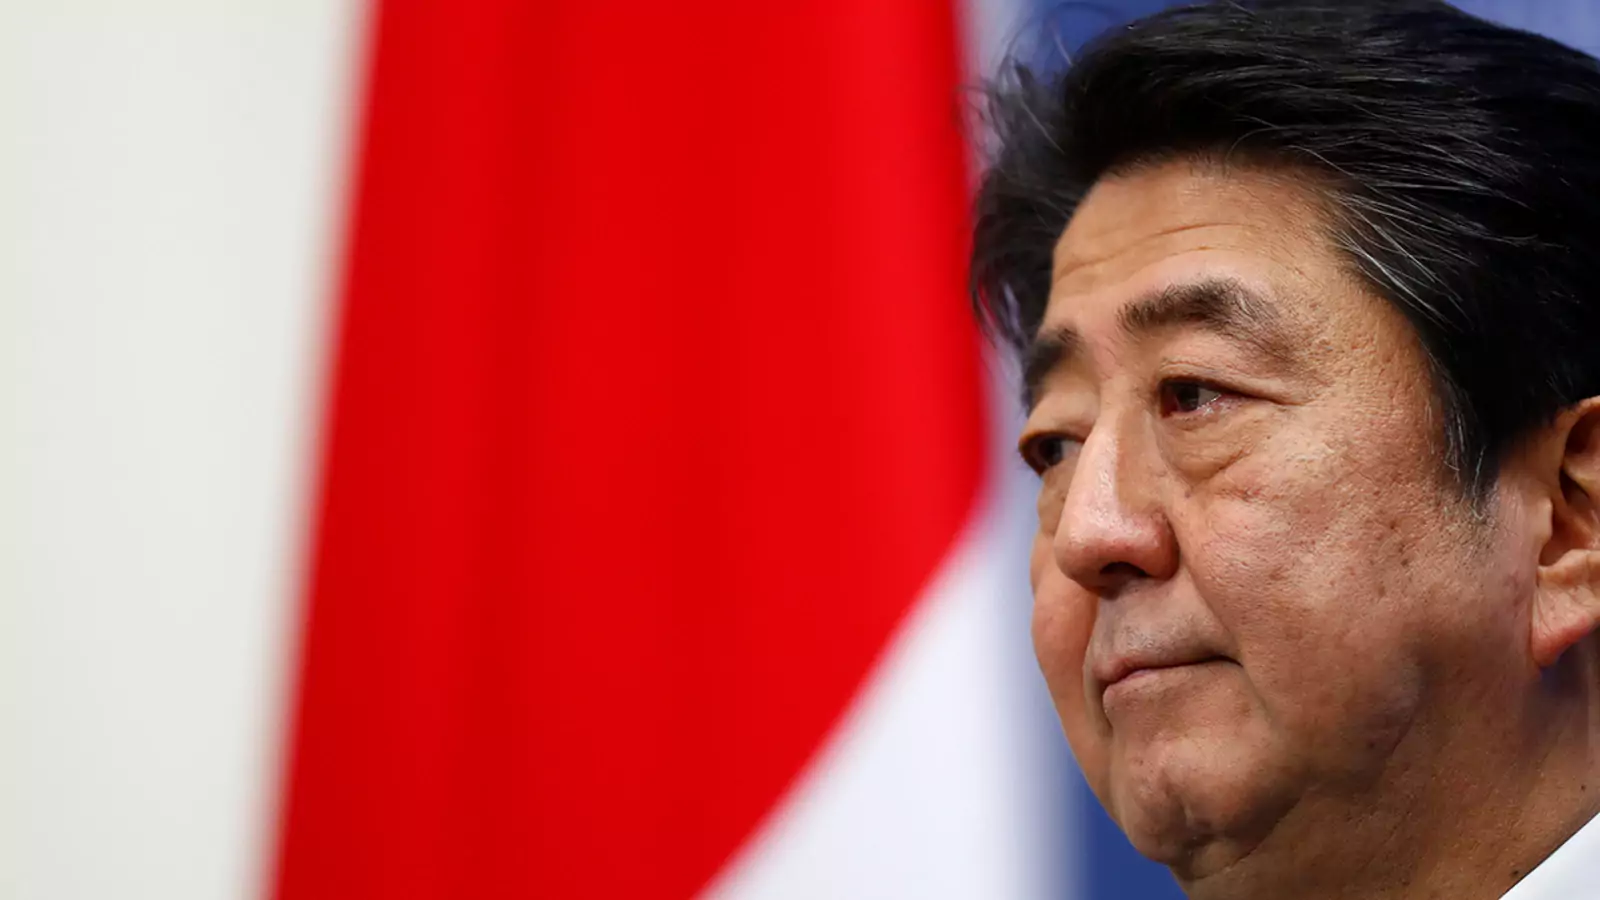 Japanese Prime Minister Shinzo Abe holds a press conference in January 2018.